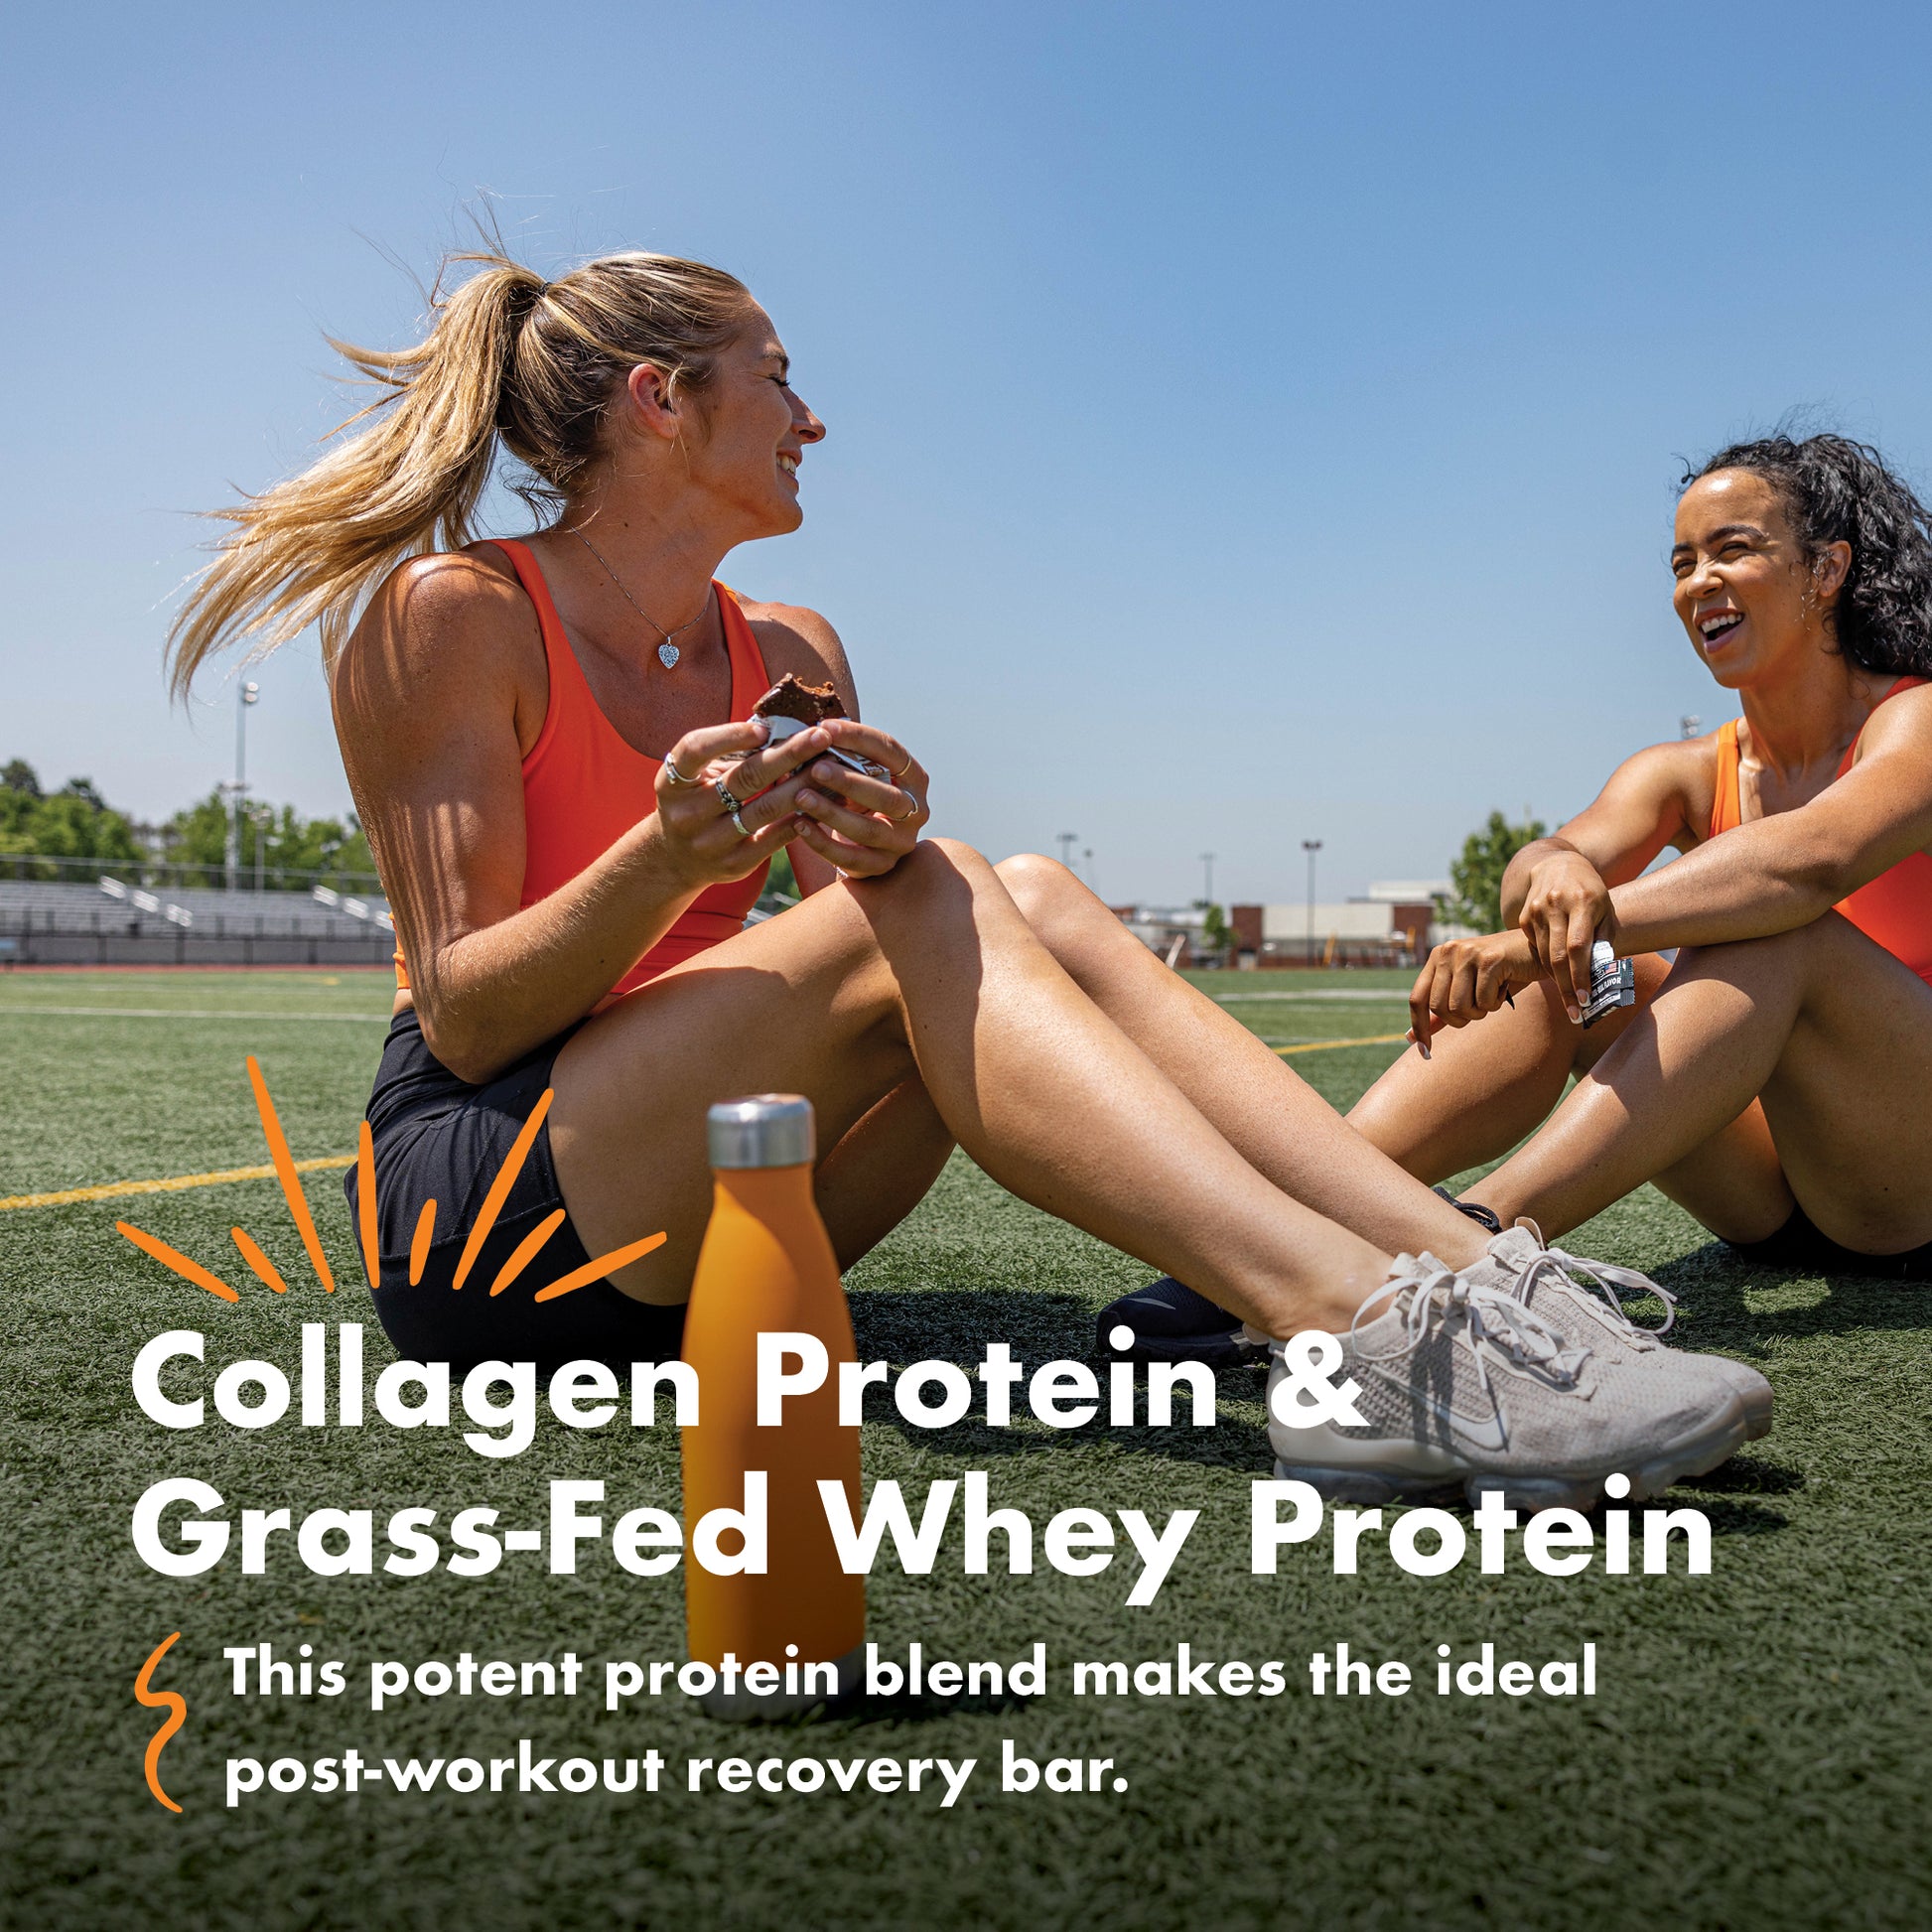 Collagen Protein & Grass-Fed Whey Protein - This potent protein blend makes the ideal post-workout recovery bar.